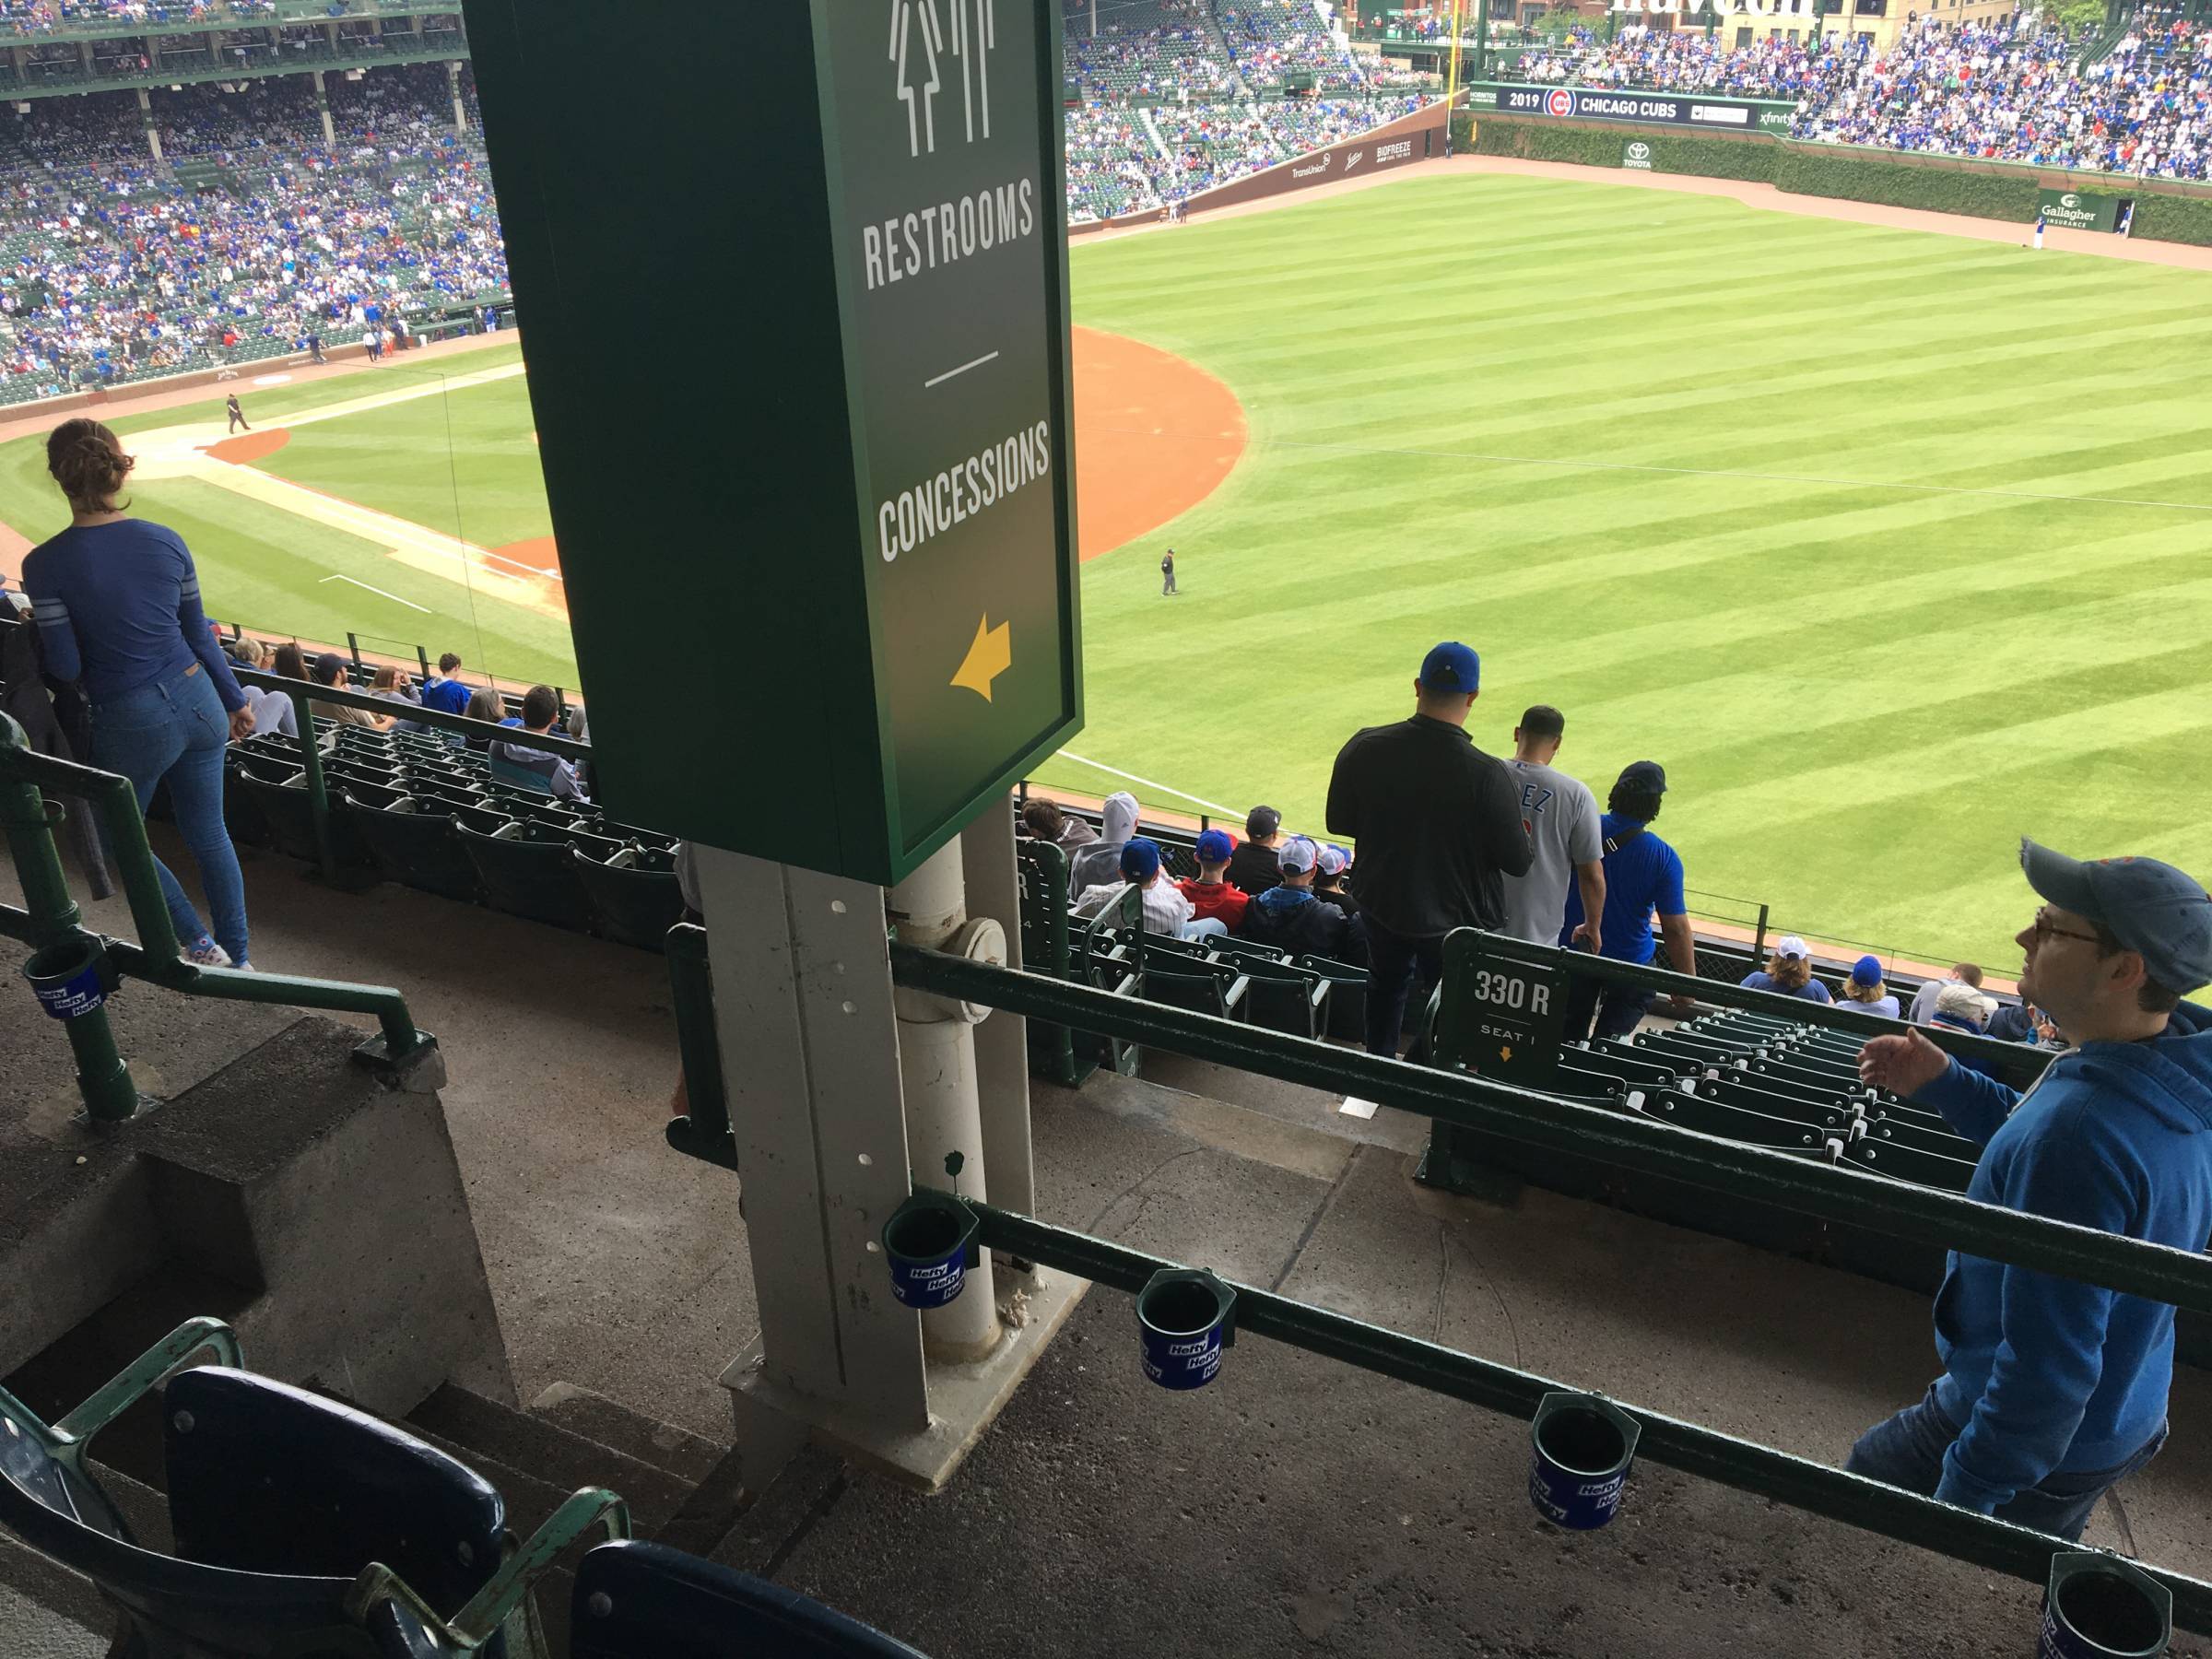 Pole in Section 430R at Wrigley Field